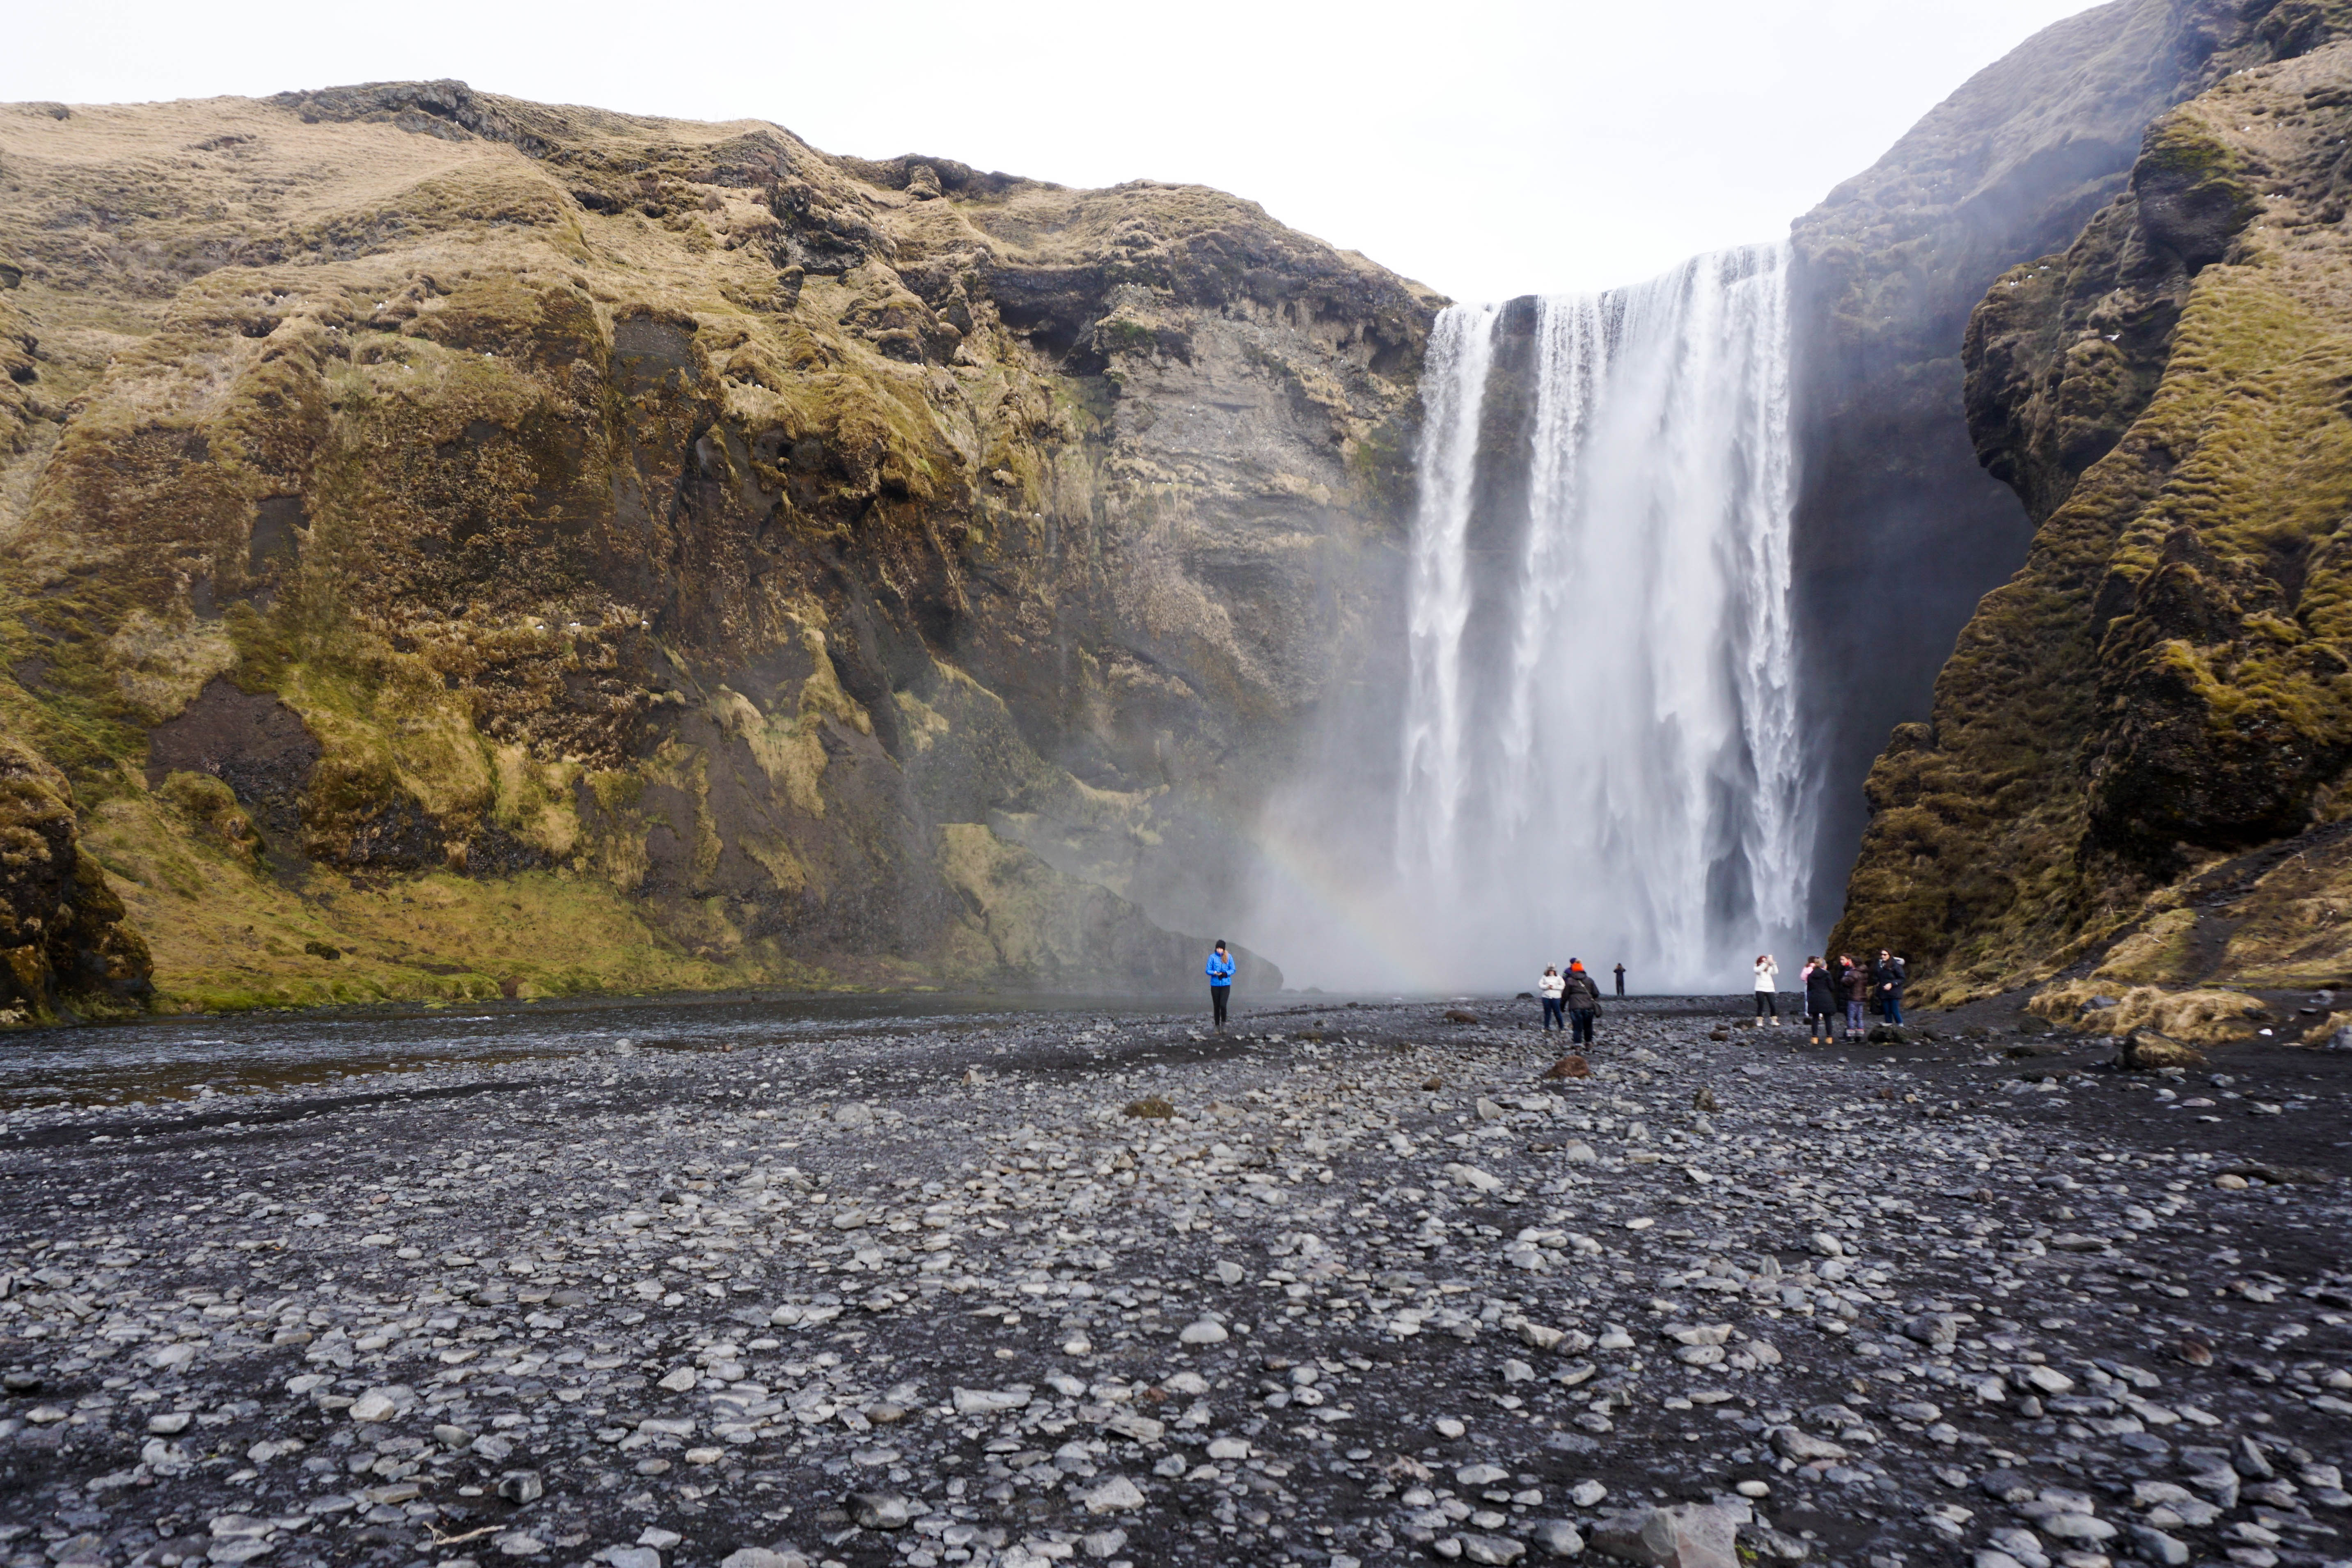 South Iceland must visit places - Skogafoss Waterfall // Iceland trip planning made easy with TripCreator.com | Life With a Viwe